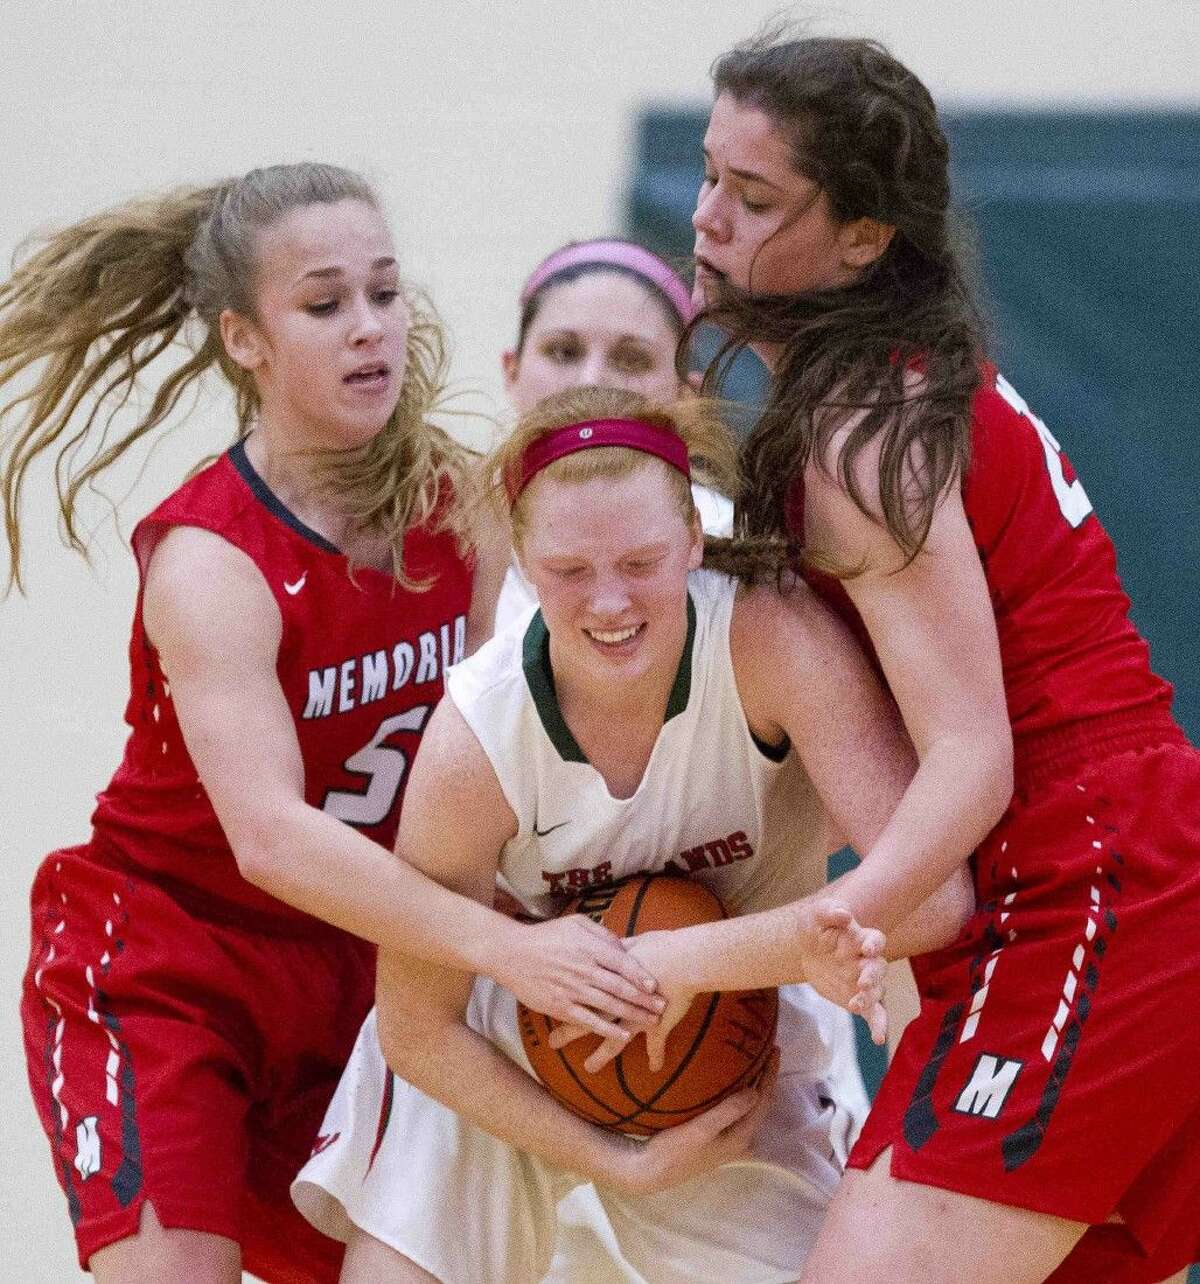 The Woodlands forward Madison Mcgurrin fights Memorial guard Kelsey Slattery and forward Elizabeth Eubank for control of a loose ball during a high school basketball game Tuesday, Nov. 24, 2015, in The Woodlands. Go to HCNpics.com to view more photos of the game.